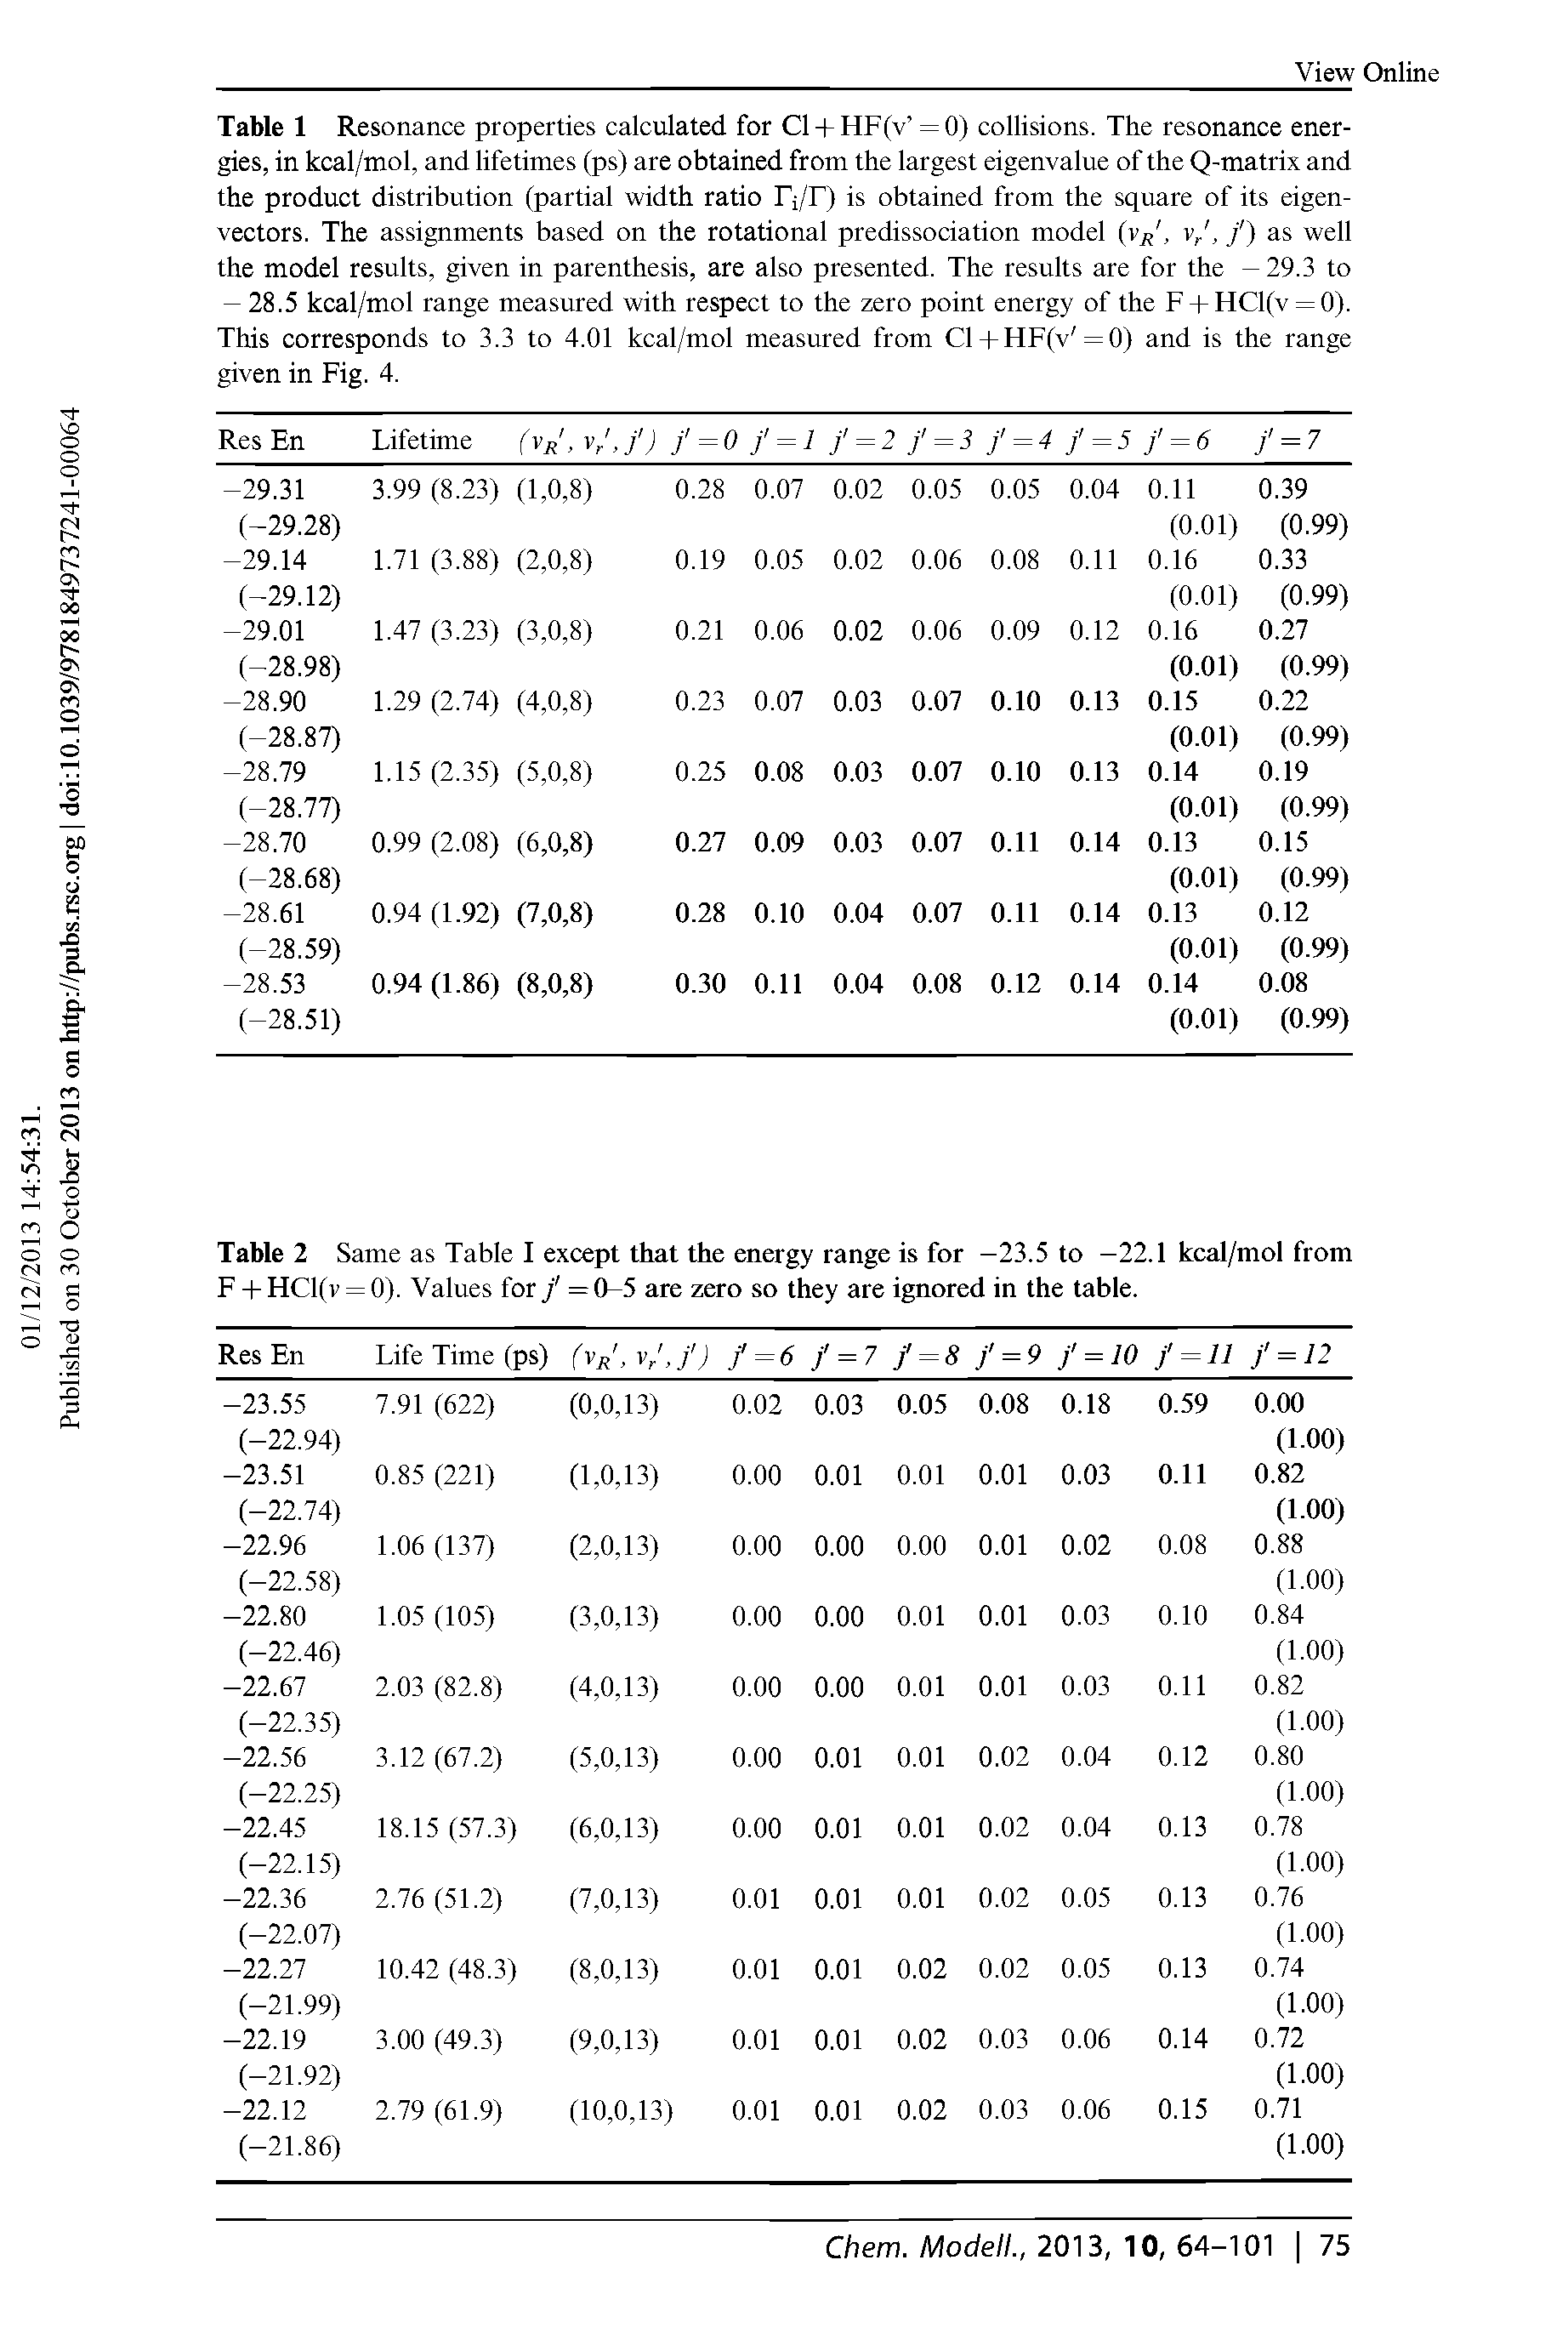 Table 1 Resonance properties calculated for Cl + HF(v = 0) collisions. The resonance energies, in kcal/mol, and lifetimes (ps) are obtained from the largest eigenvalue of the Q-matrix and the product distribution (partial width ratio Fi/F) is obtained from the square of its eigenvectors. The assignments based on the rotational predissociation model (vj , v/, /) as well the model results, given in parenthesis, are also presented. The results are for the —29.3 to - 28.5 kcal/mol range measured with respect to the zero point energy of the F + HCl(v = 0). This corresponds to 3.3 to 4.01 kcal/mol measured from Cl- -HF(v = 0) and is the range given in Fig. 4.